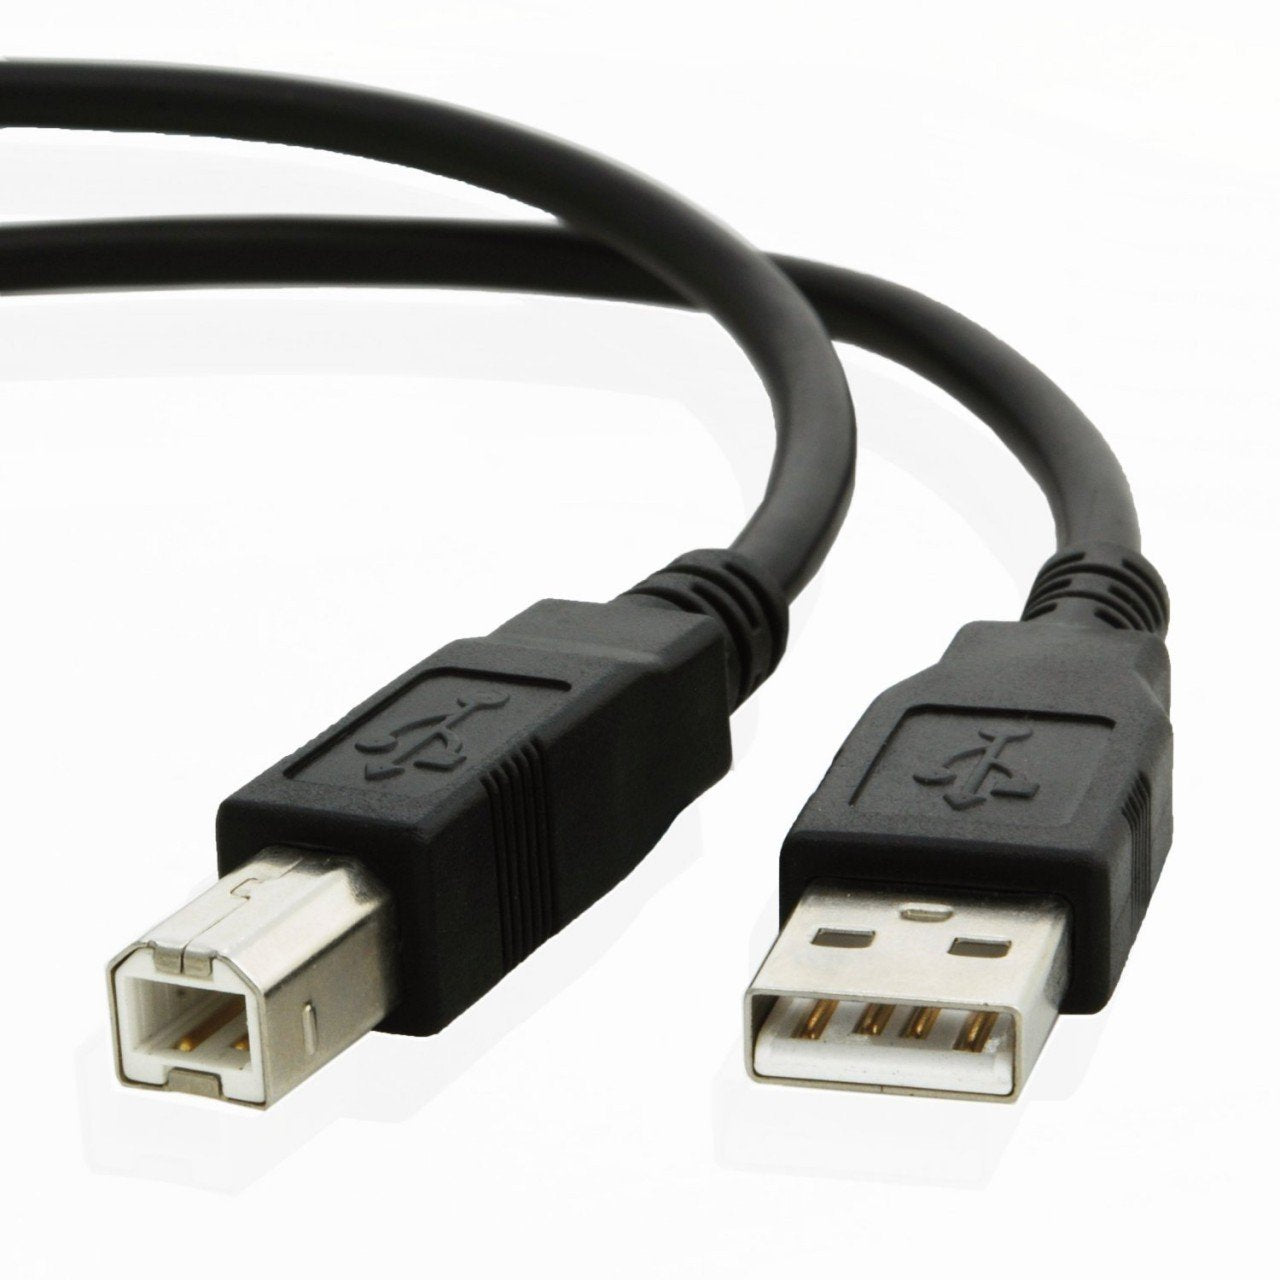 USB cable for Dymo LABELWRITER 450 Duo